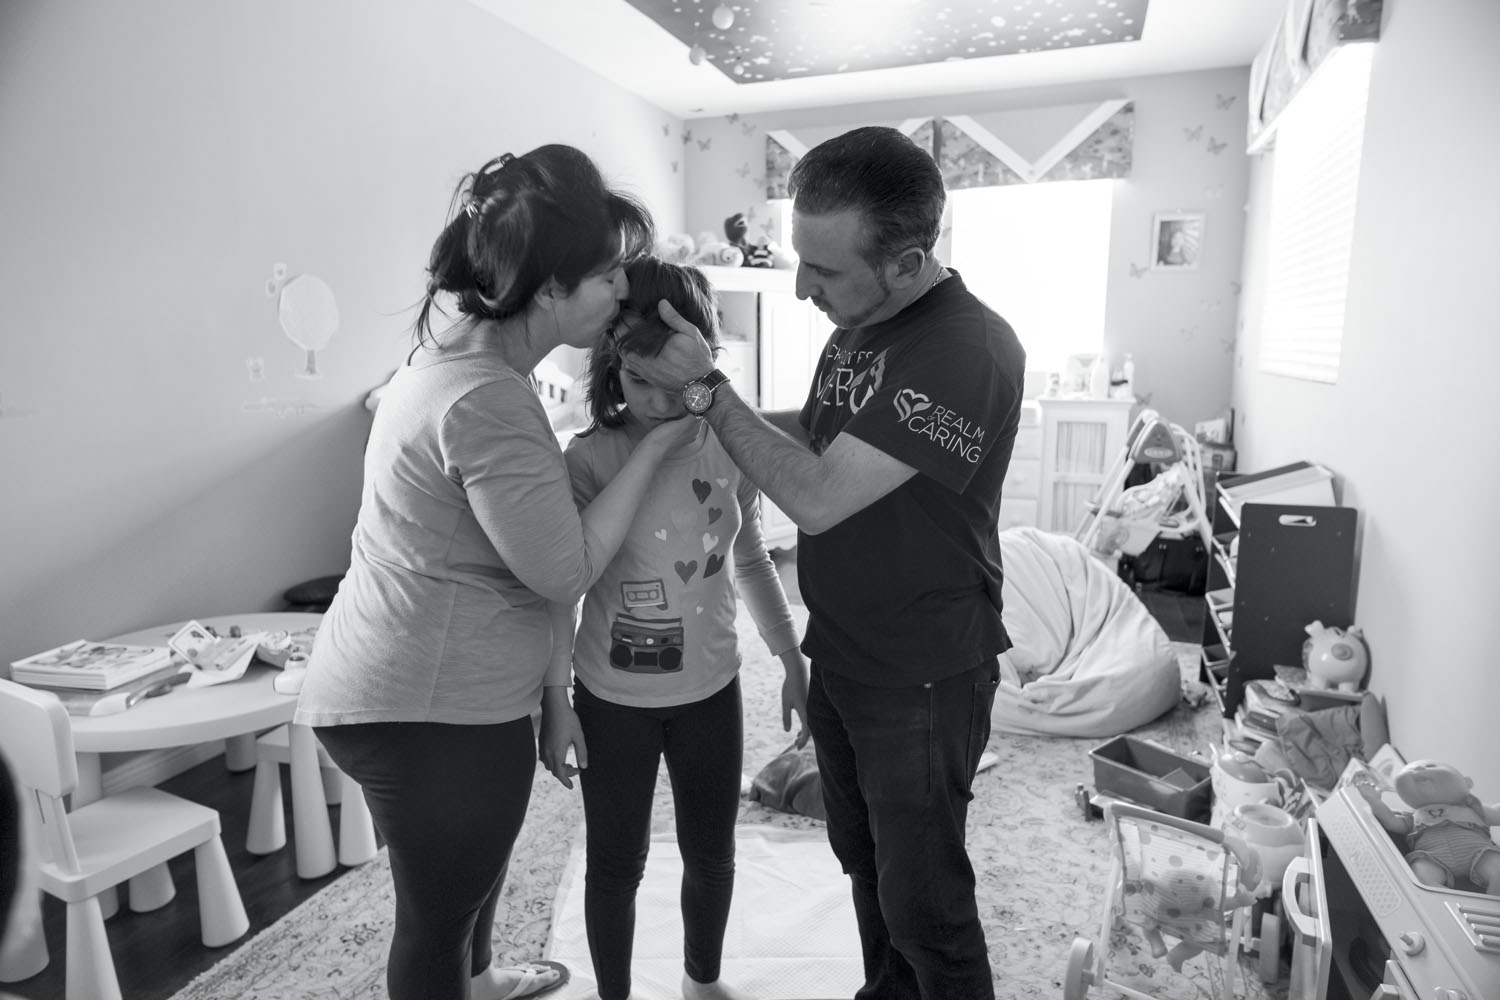 Ray Mirzabegian and Arsineh Yaghyaei attend to their daughter Emily as she recovers from a seizure. Los Angeles, CA, April 2018.